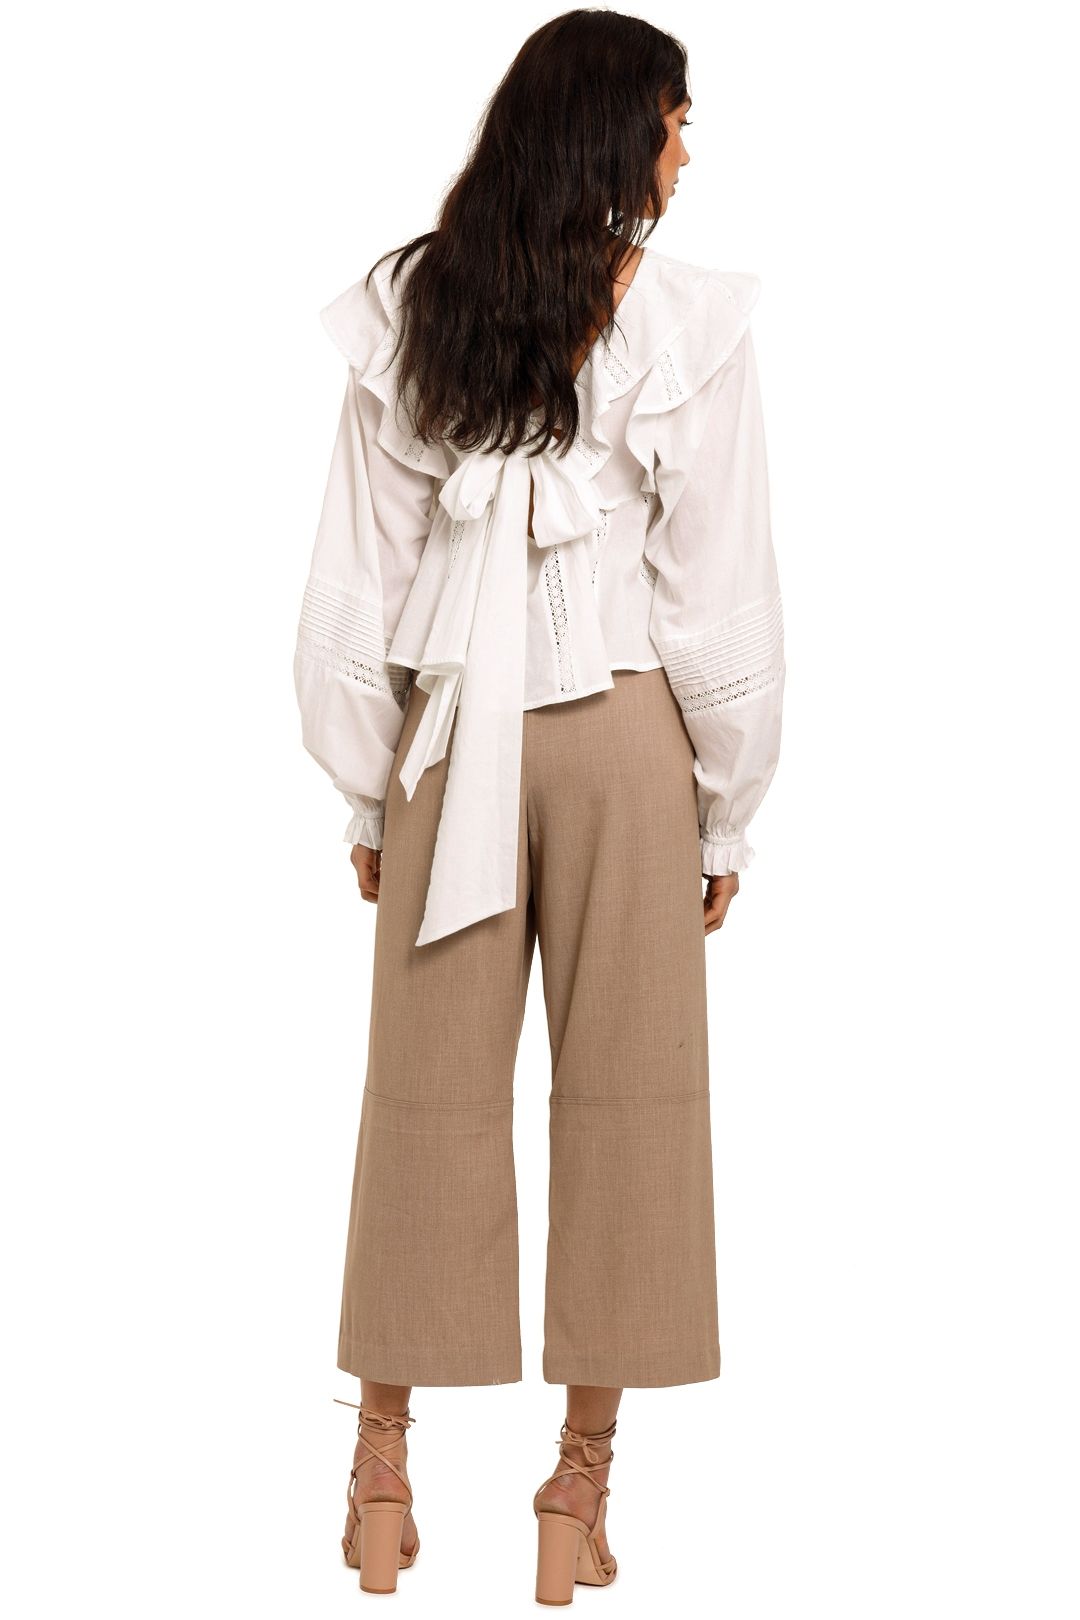 Elka Collective Shore Pant cropped